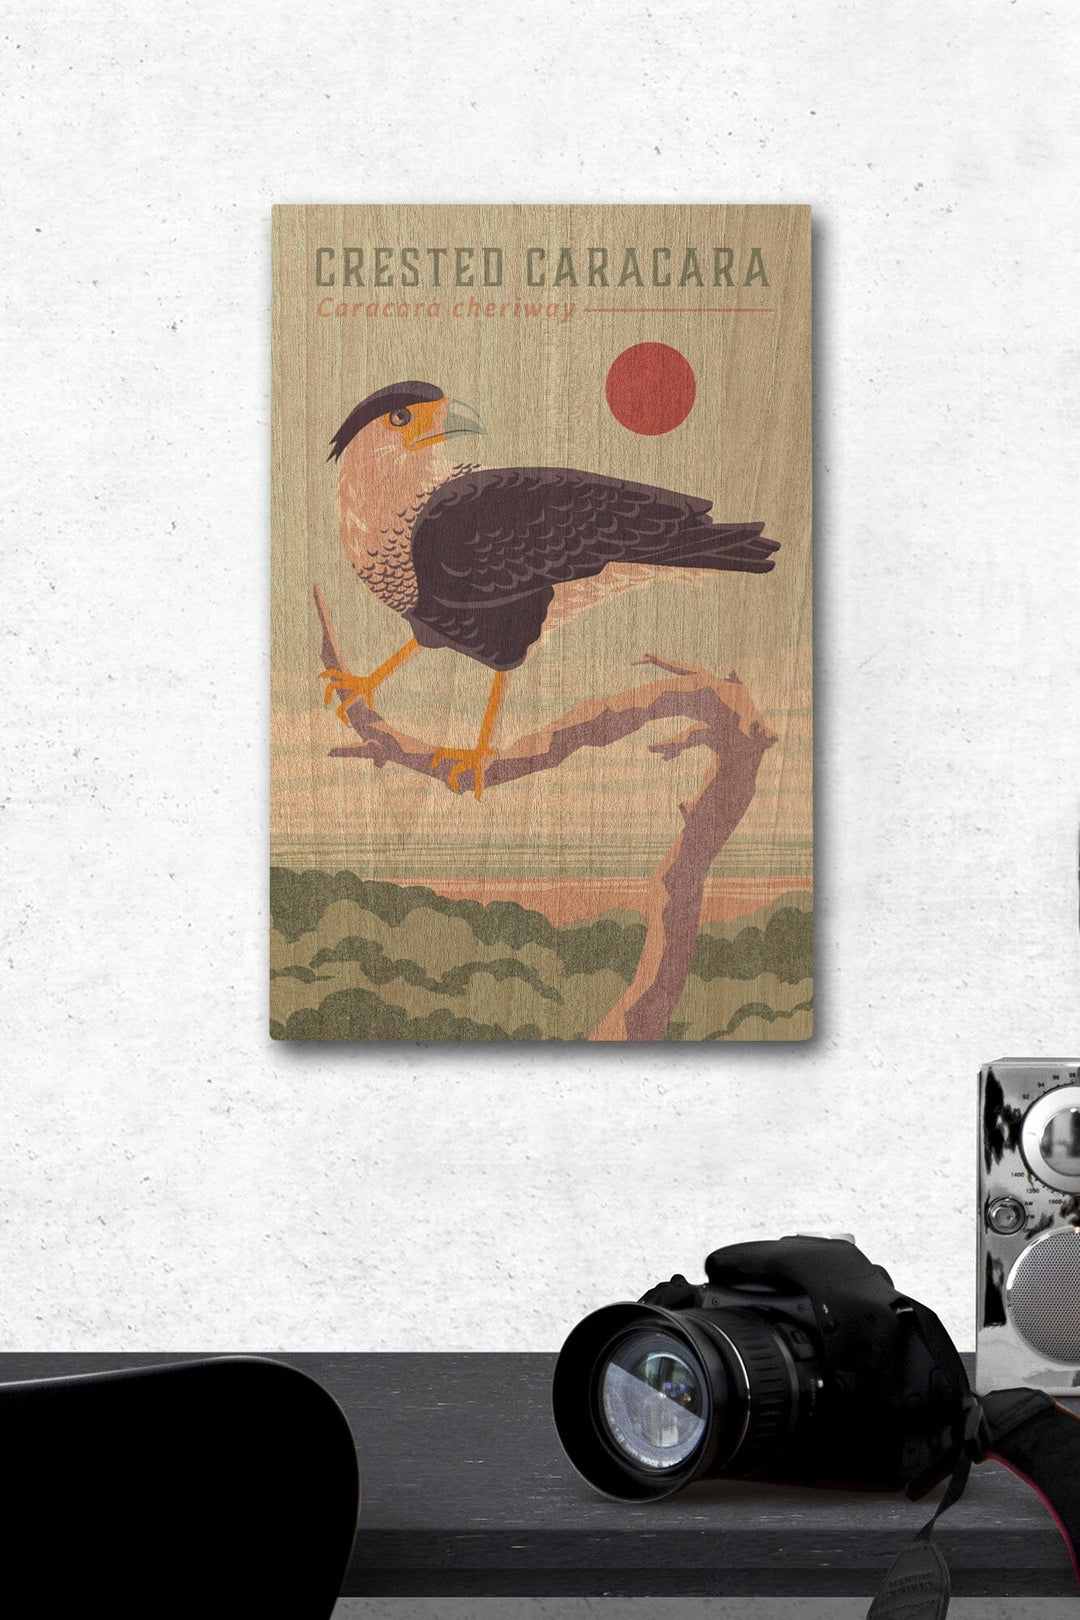 Shorebirds at Sunset Collection, Crested Caracara, Bird, Wood Signs and Postcards Wood Lantern Press 12 x 18 Wood Gallery Print 